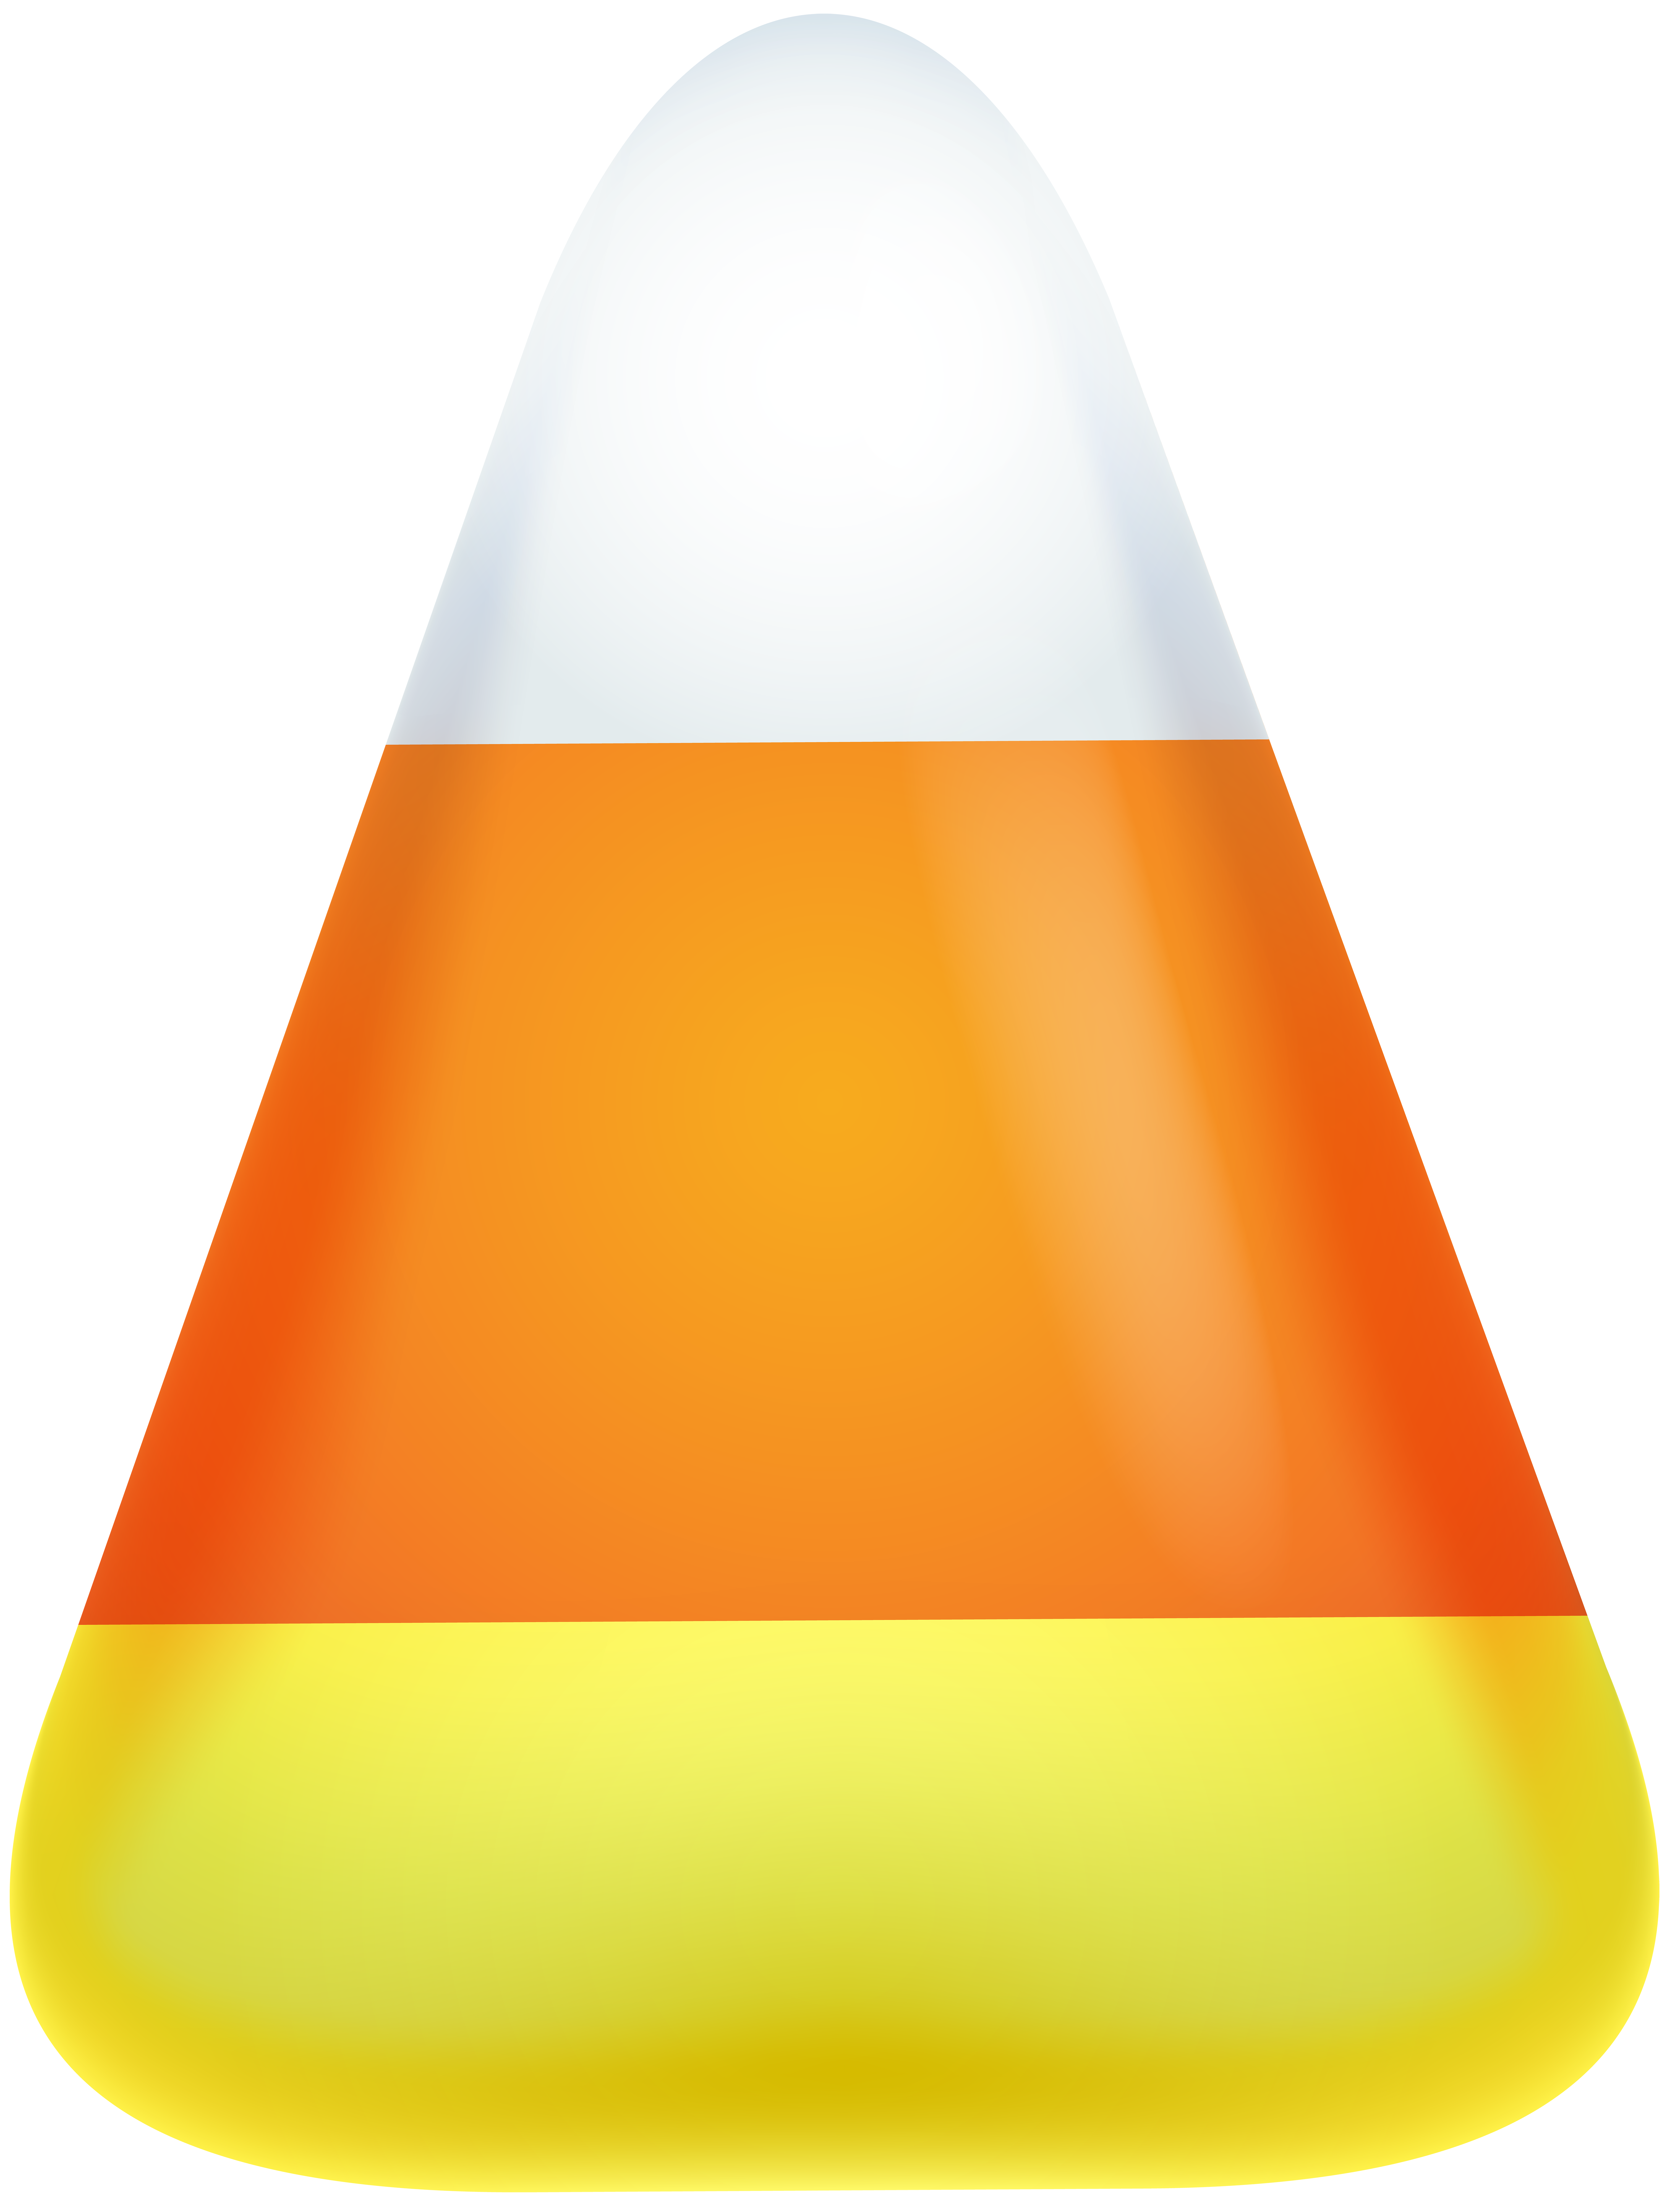 Halloween Candy Corn PNG Clip Art Image.